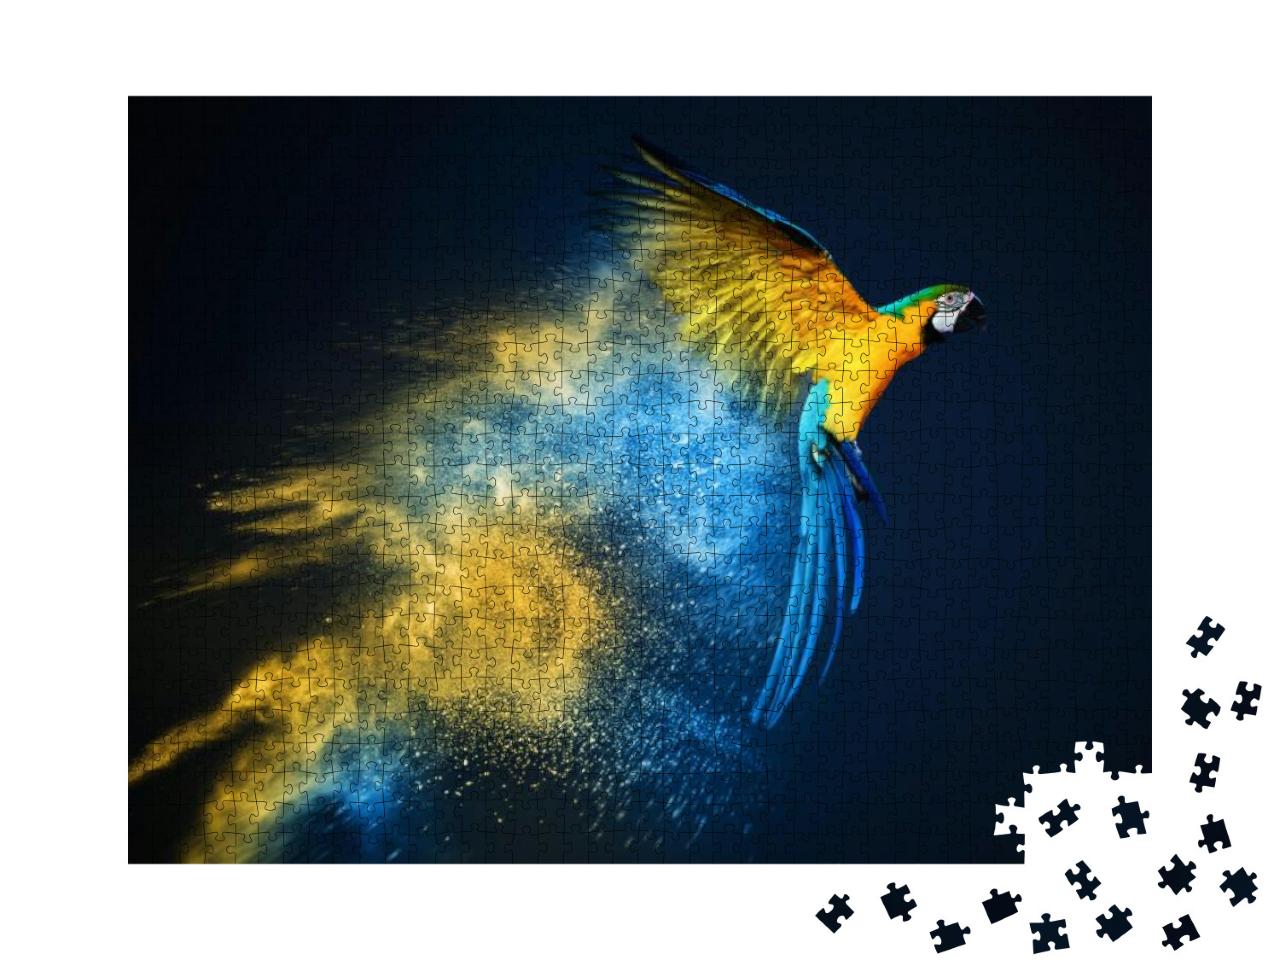 Flying Ara Parrot Over Colorful Powder Explosion... Jigsaw Puzzle with 1000 pieces